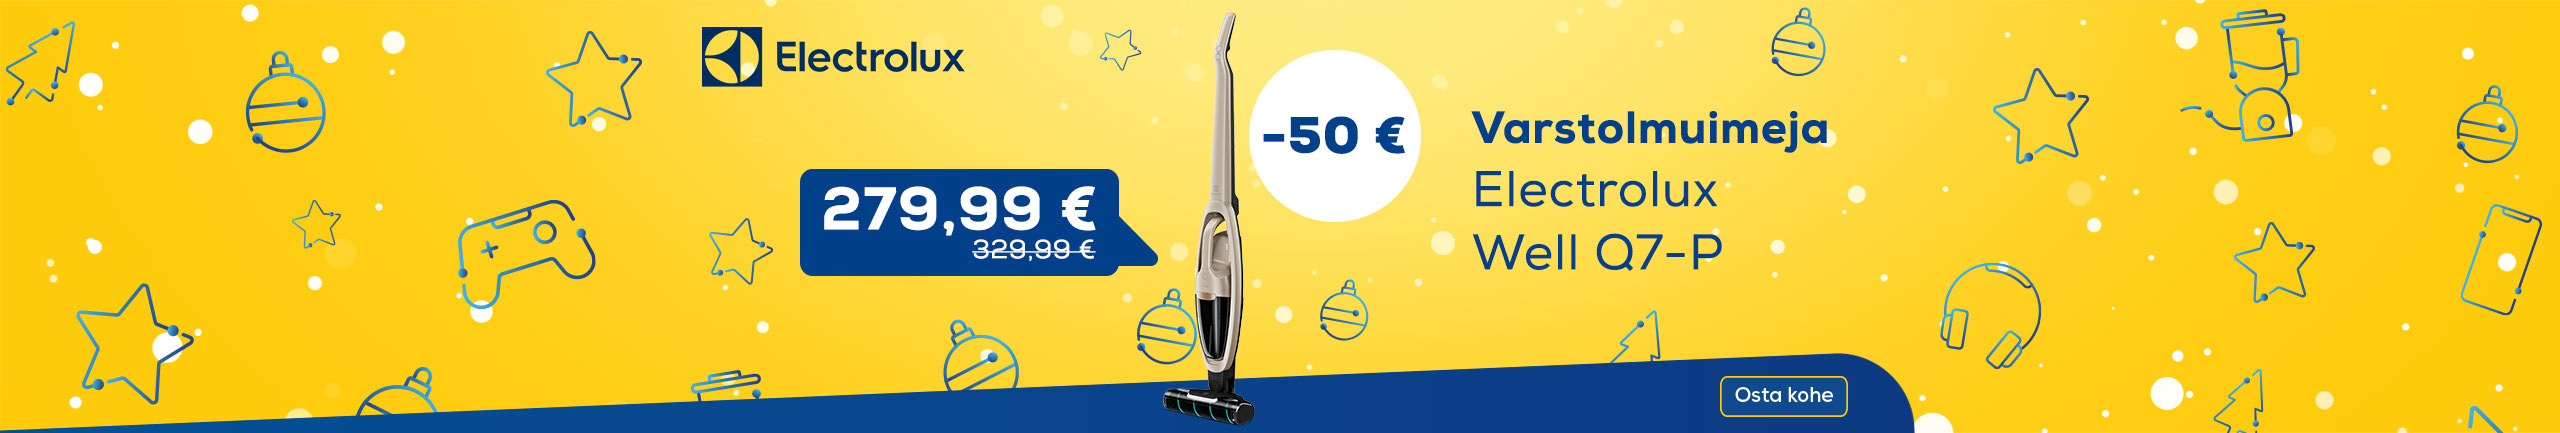 Discover Electrolux vacuums